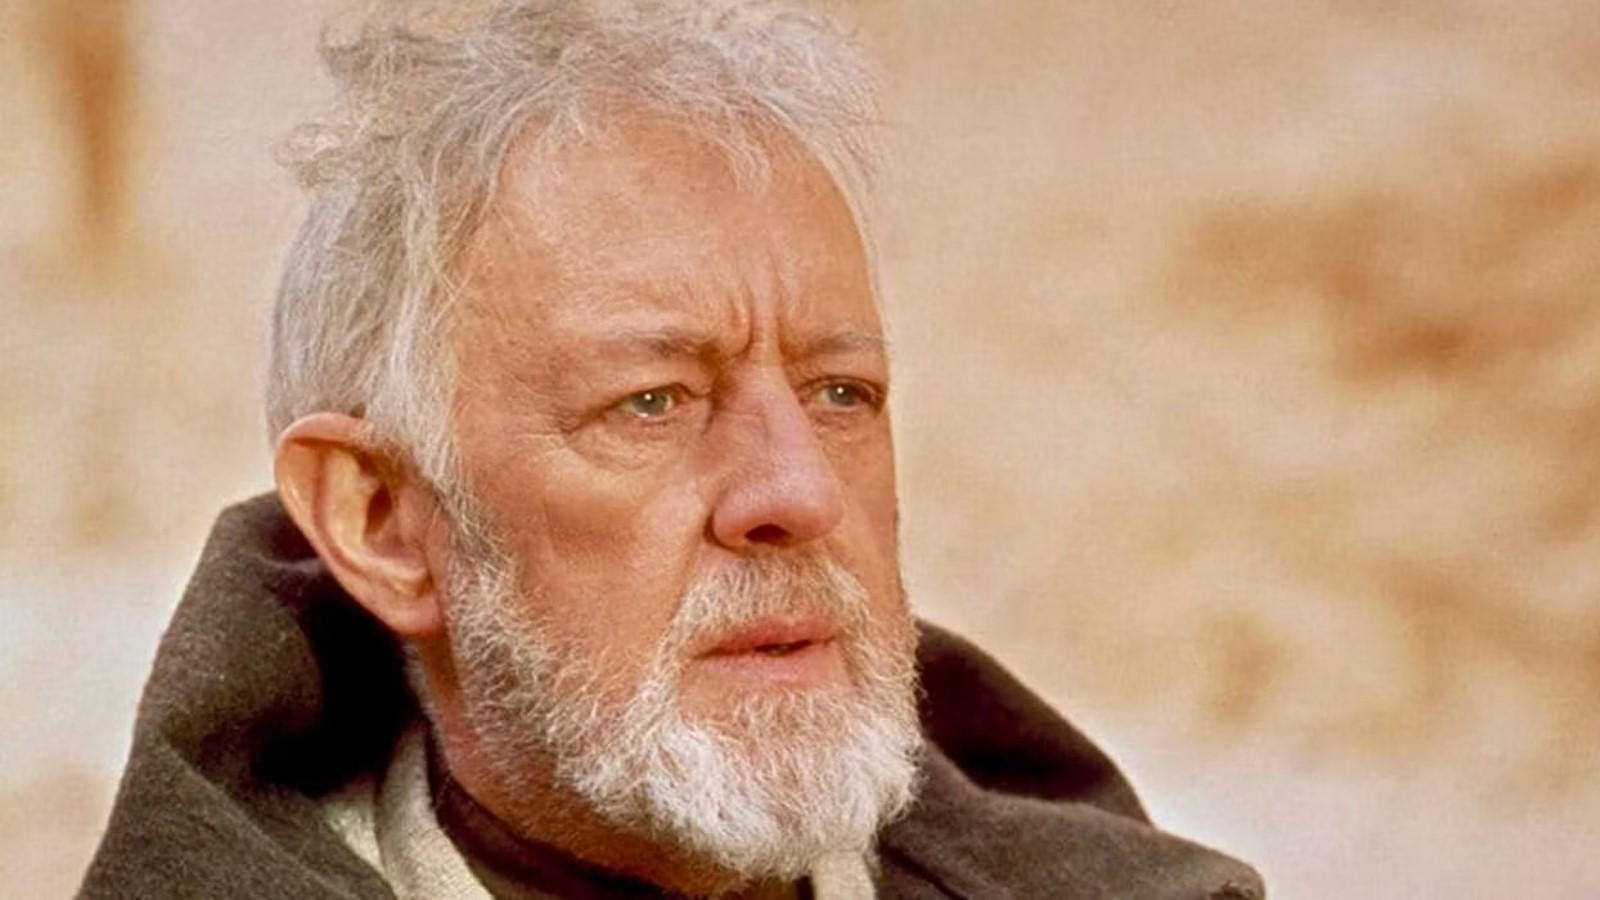 Alec Guinness as Obi-Wan in Star Wars, standing in the desert and wearing a robe